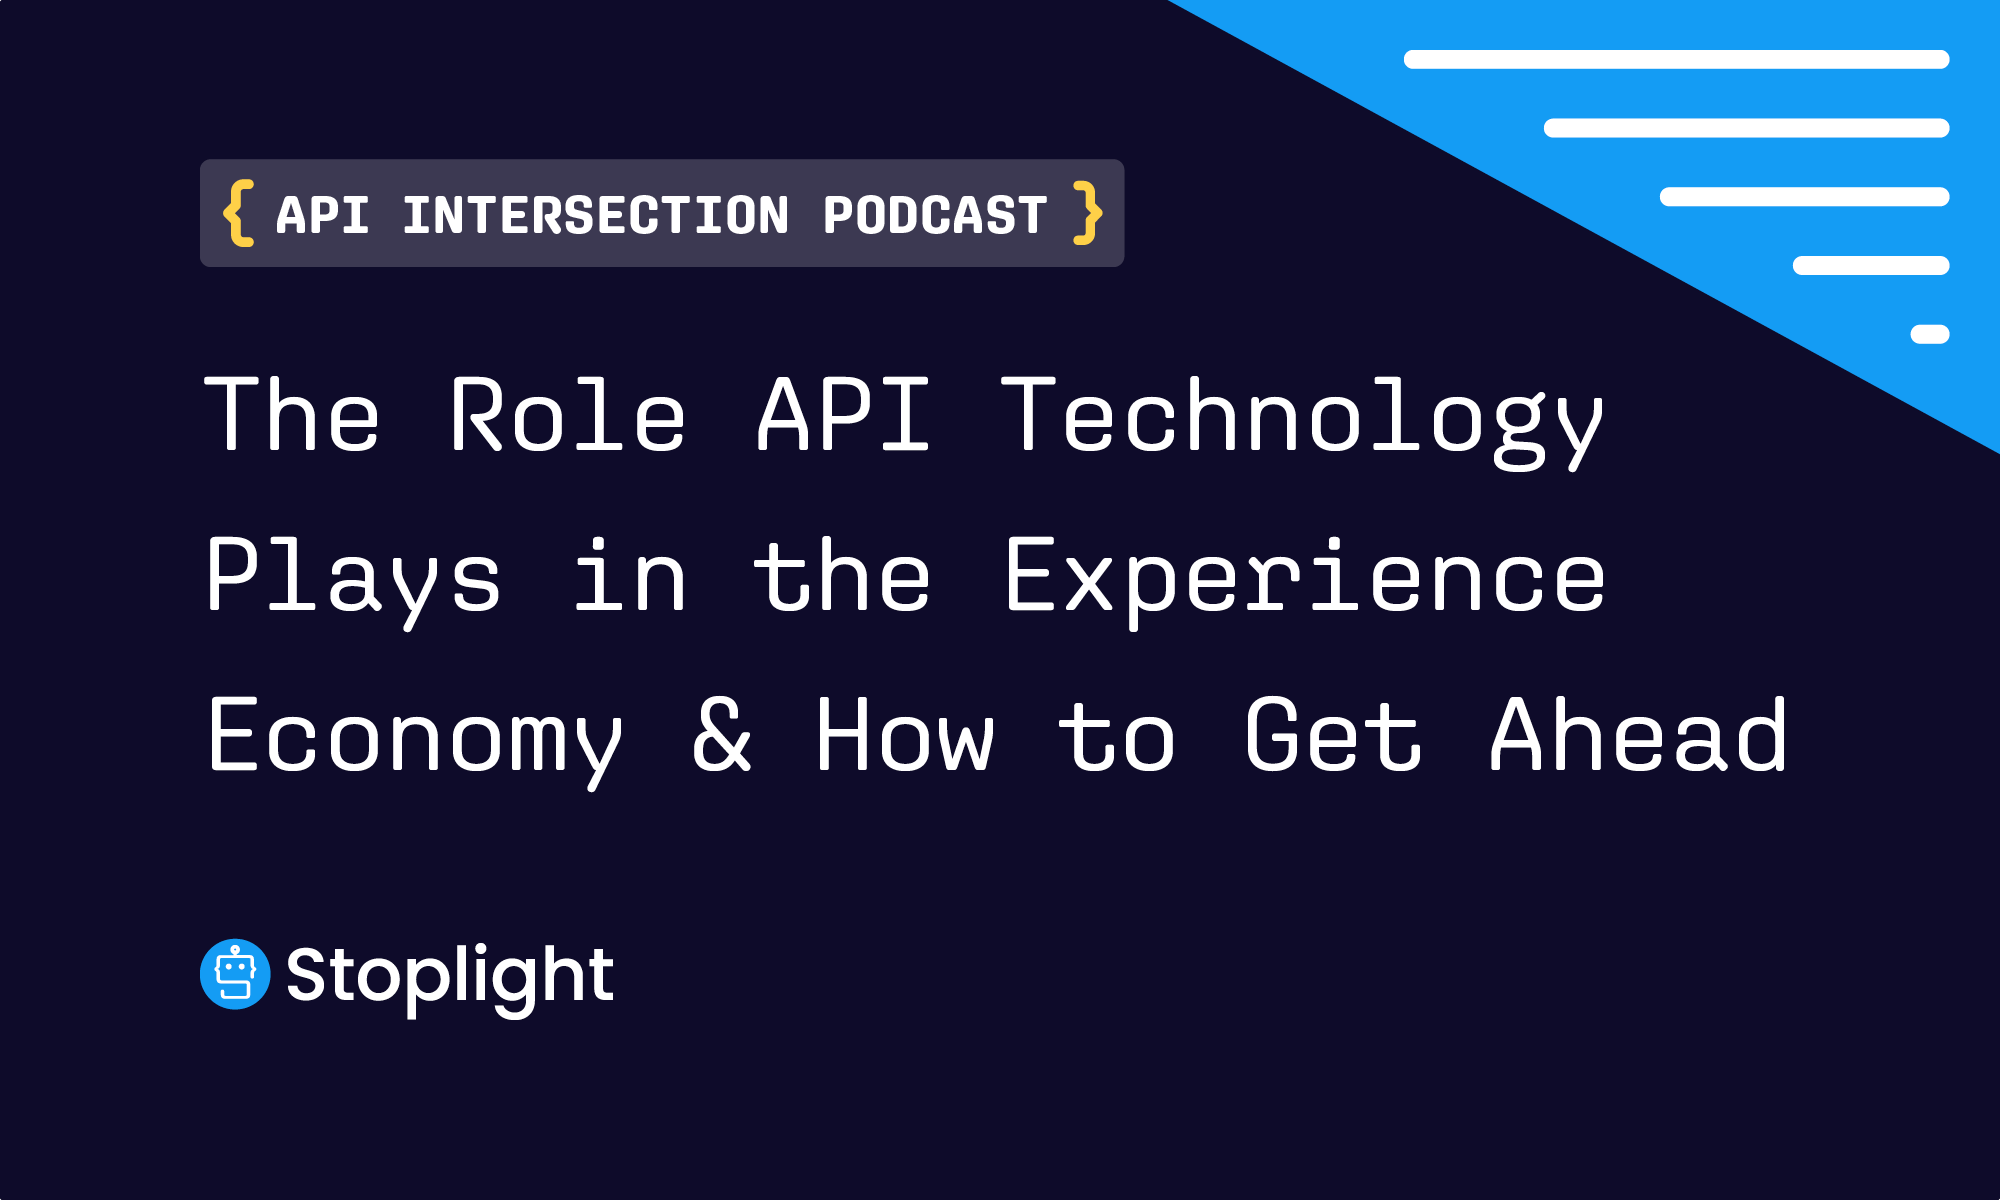 The Role APIs Play in the Experience Economy and How to Get Ahead